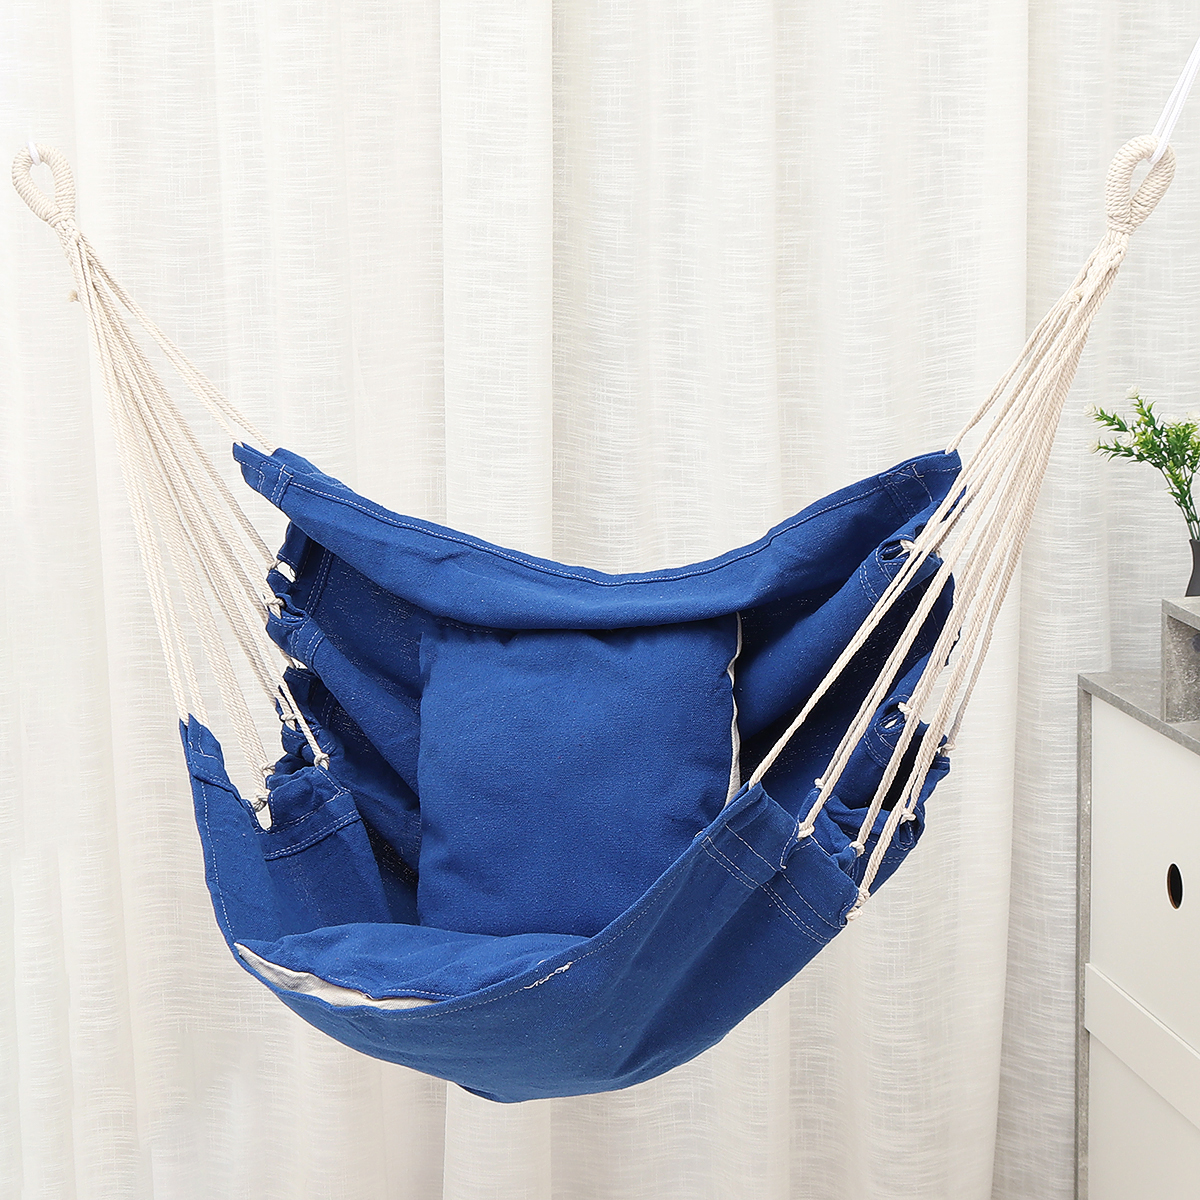 Camping-Hammock-Chair-Swing-Seat-Indoor-Outdoor-Folding-Hanging-Chair-with-Ropes-Pillow-1711690-7